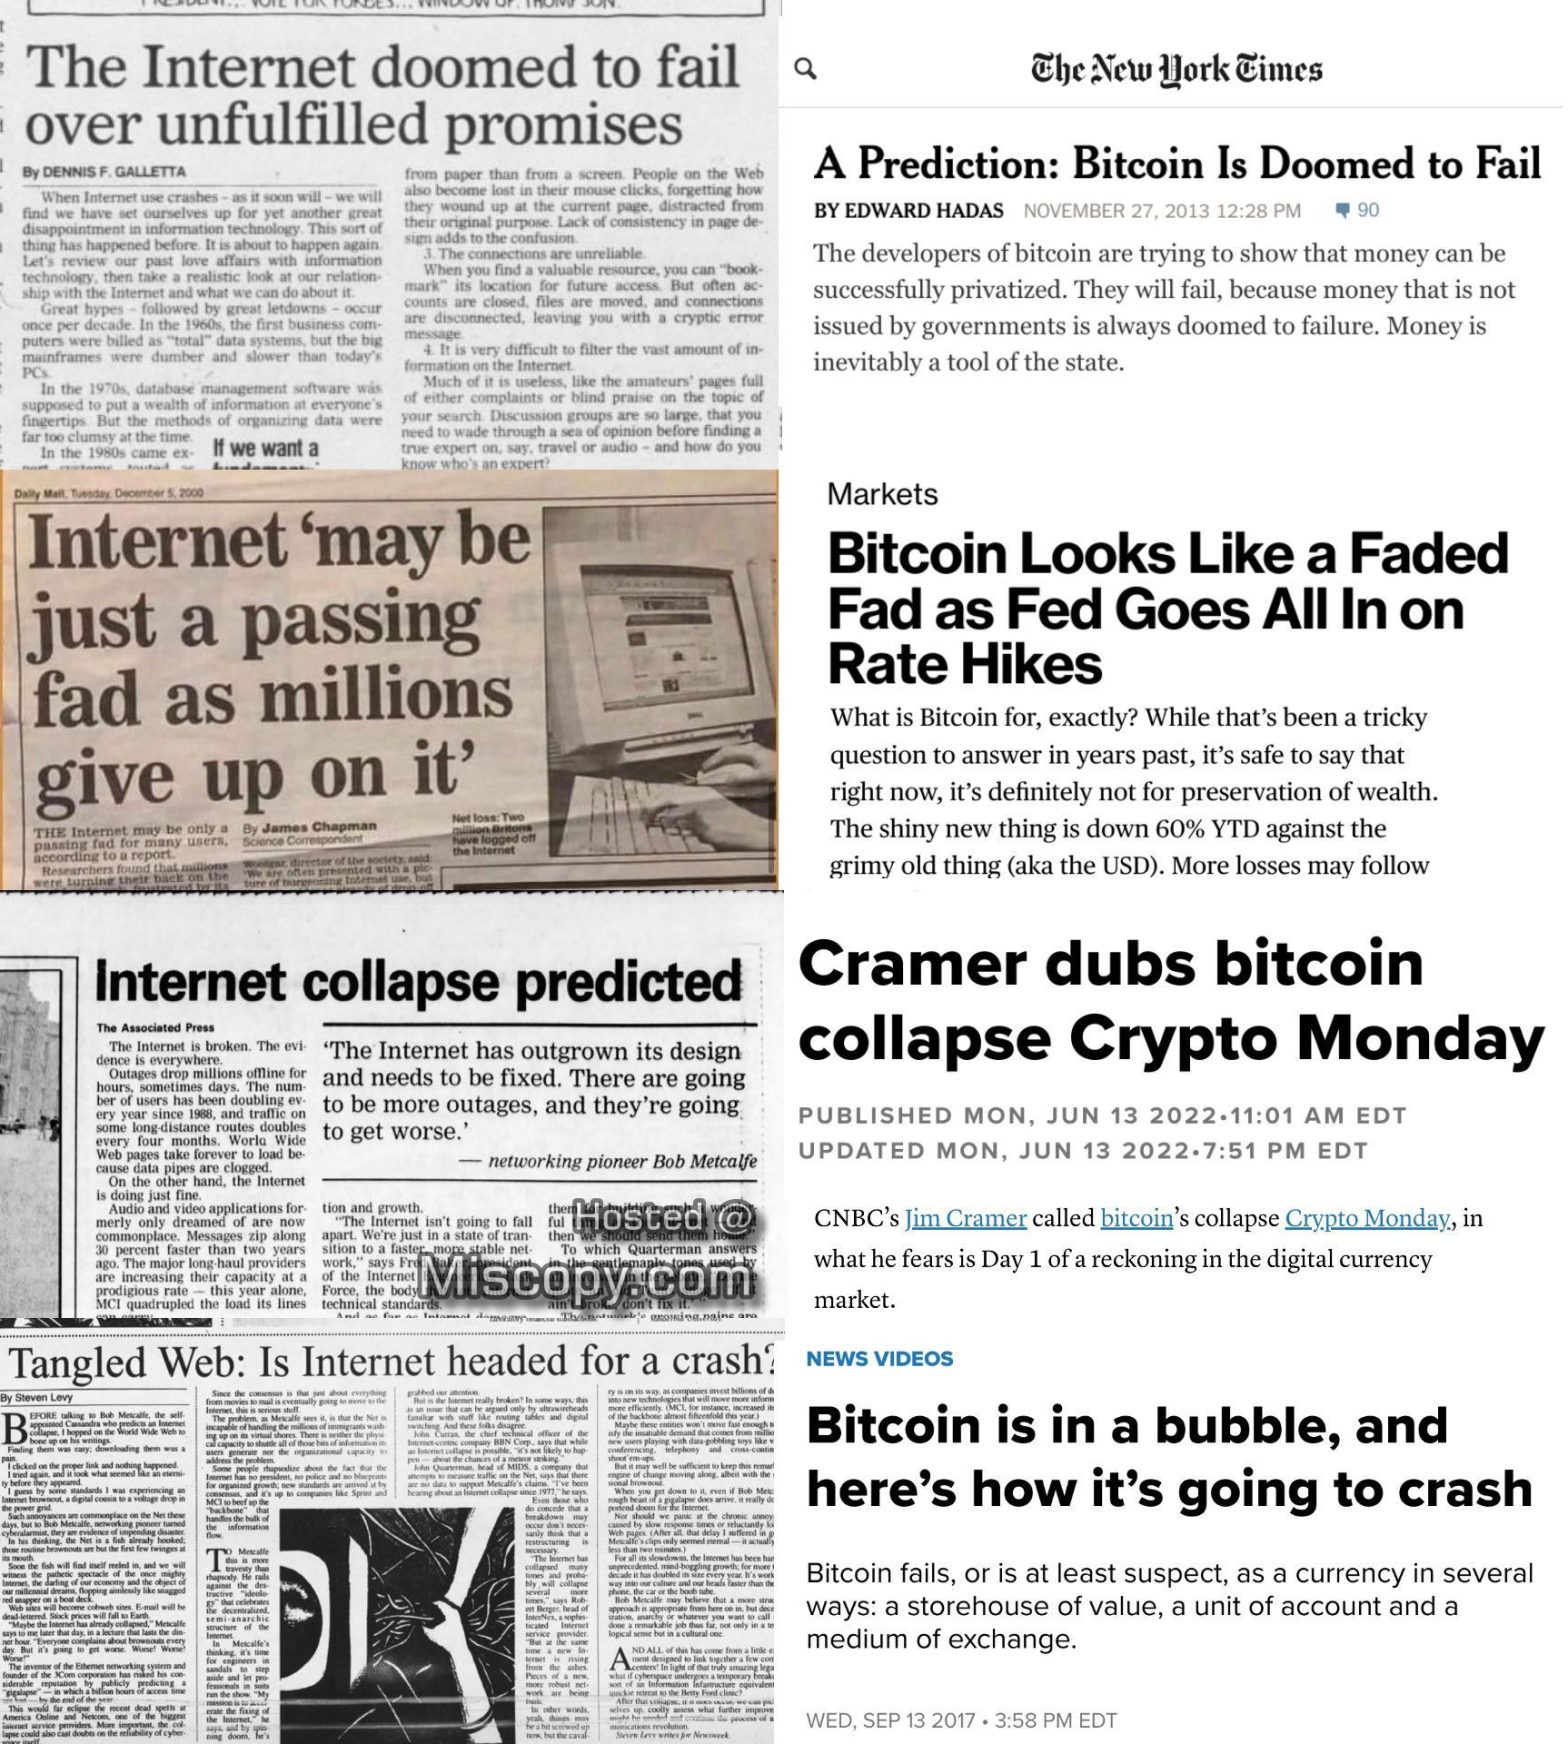 Similarities Between Fear-Mongering Around Bitcoin and Early Days of Internet